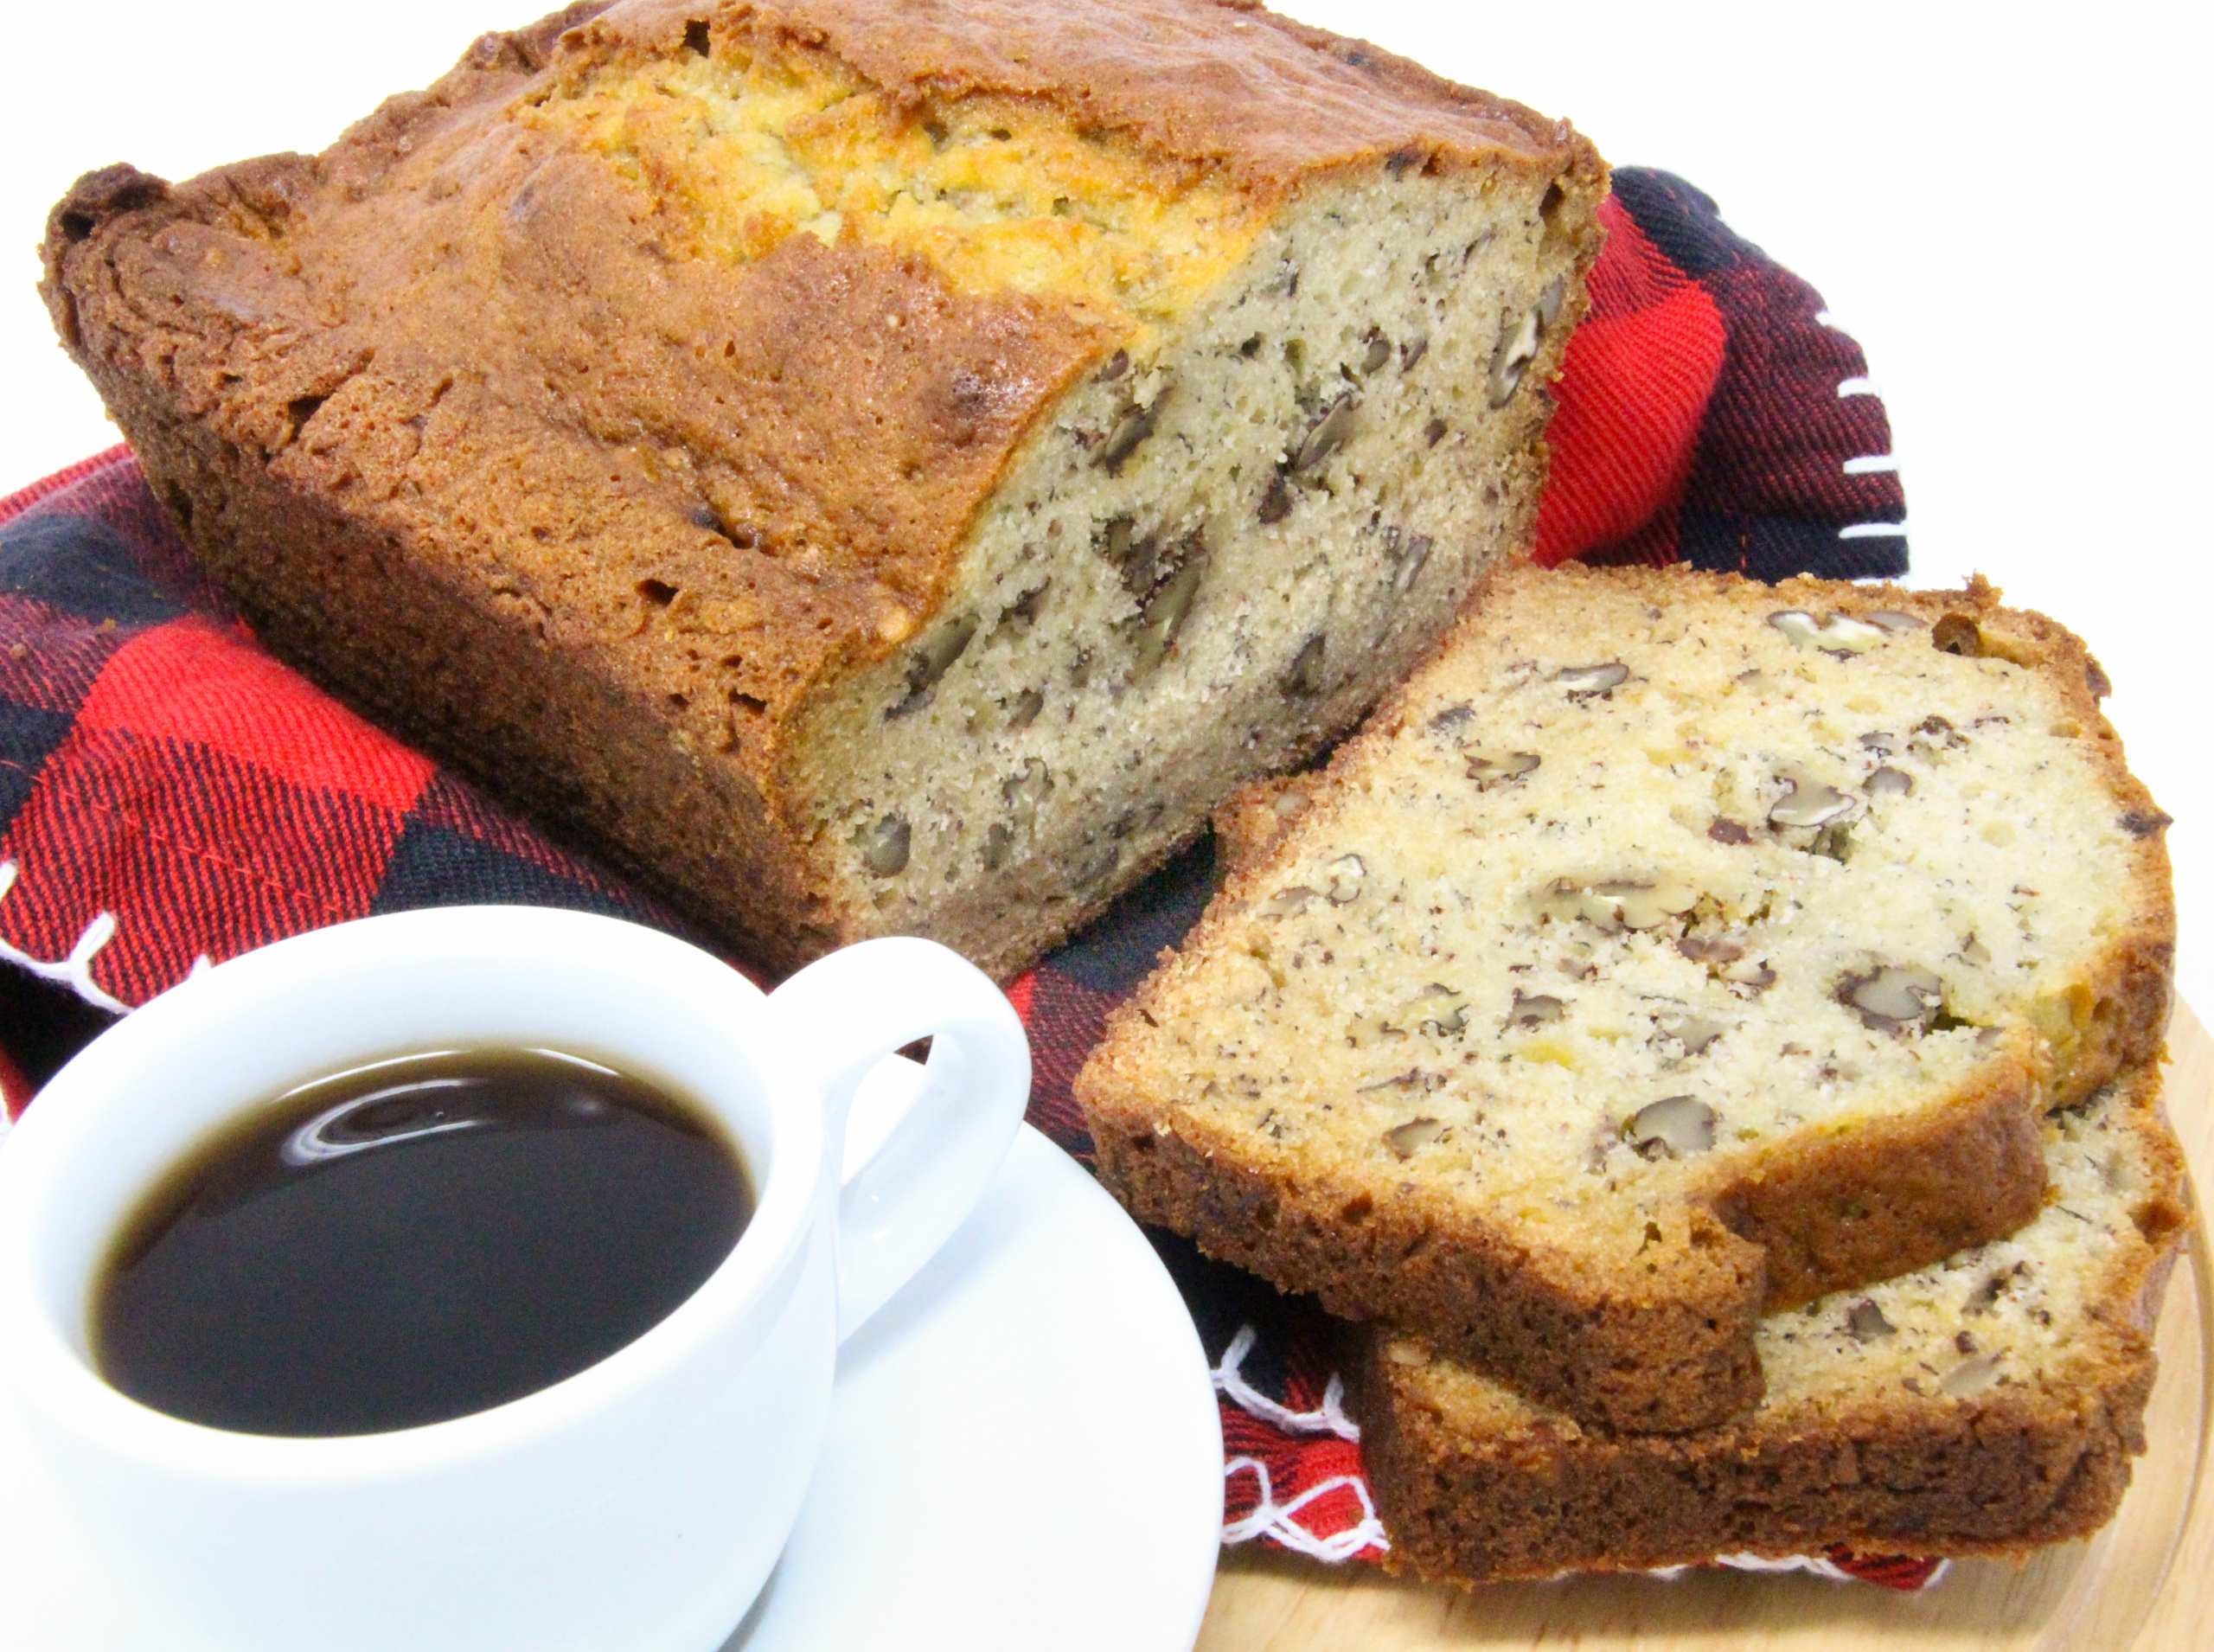 Easy to mix up, this moist sweet banana bread is delicious all on its own or slathered with sweet cream butter. Perfect for breakfast, a snack, or even dessert! Recipe shared with permission granted by Barbara Ross, author of SHUCKED APART.